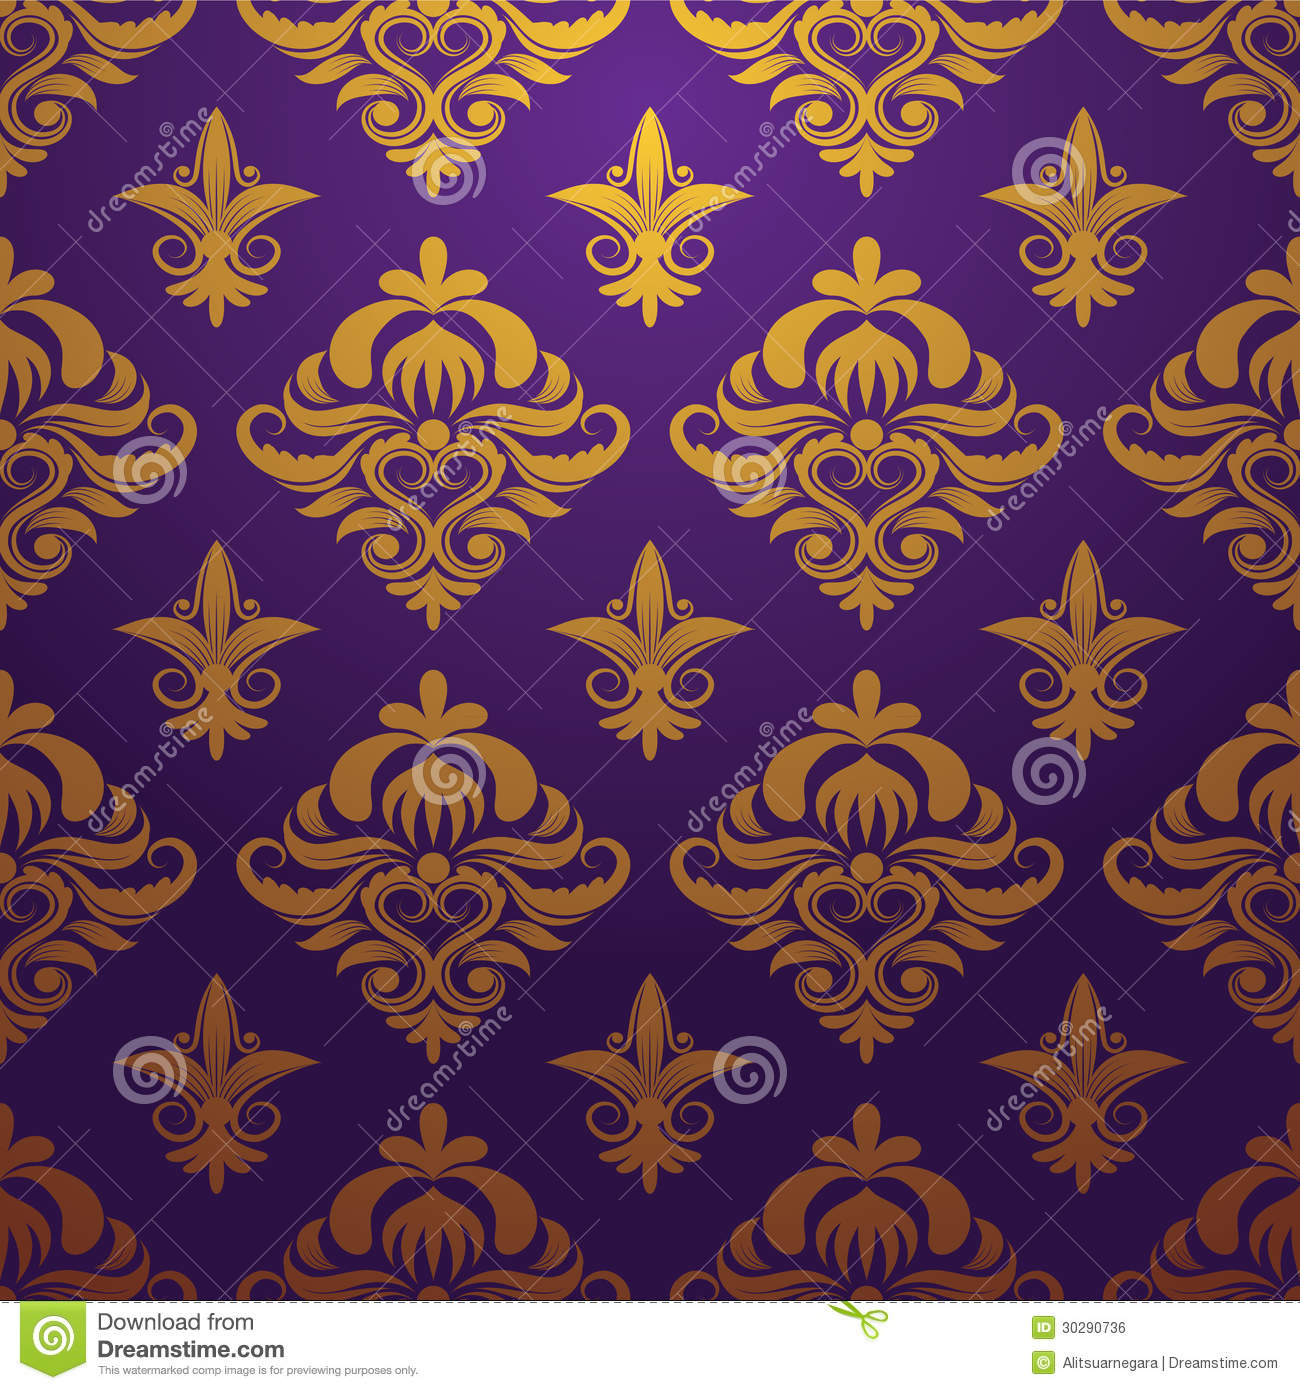 Purple and Gold Vector